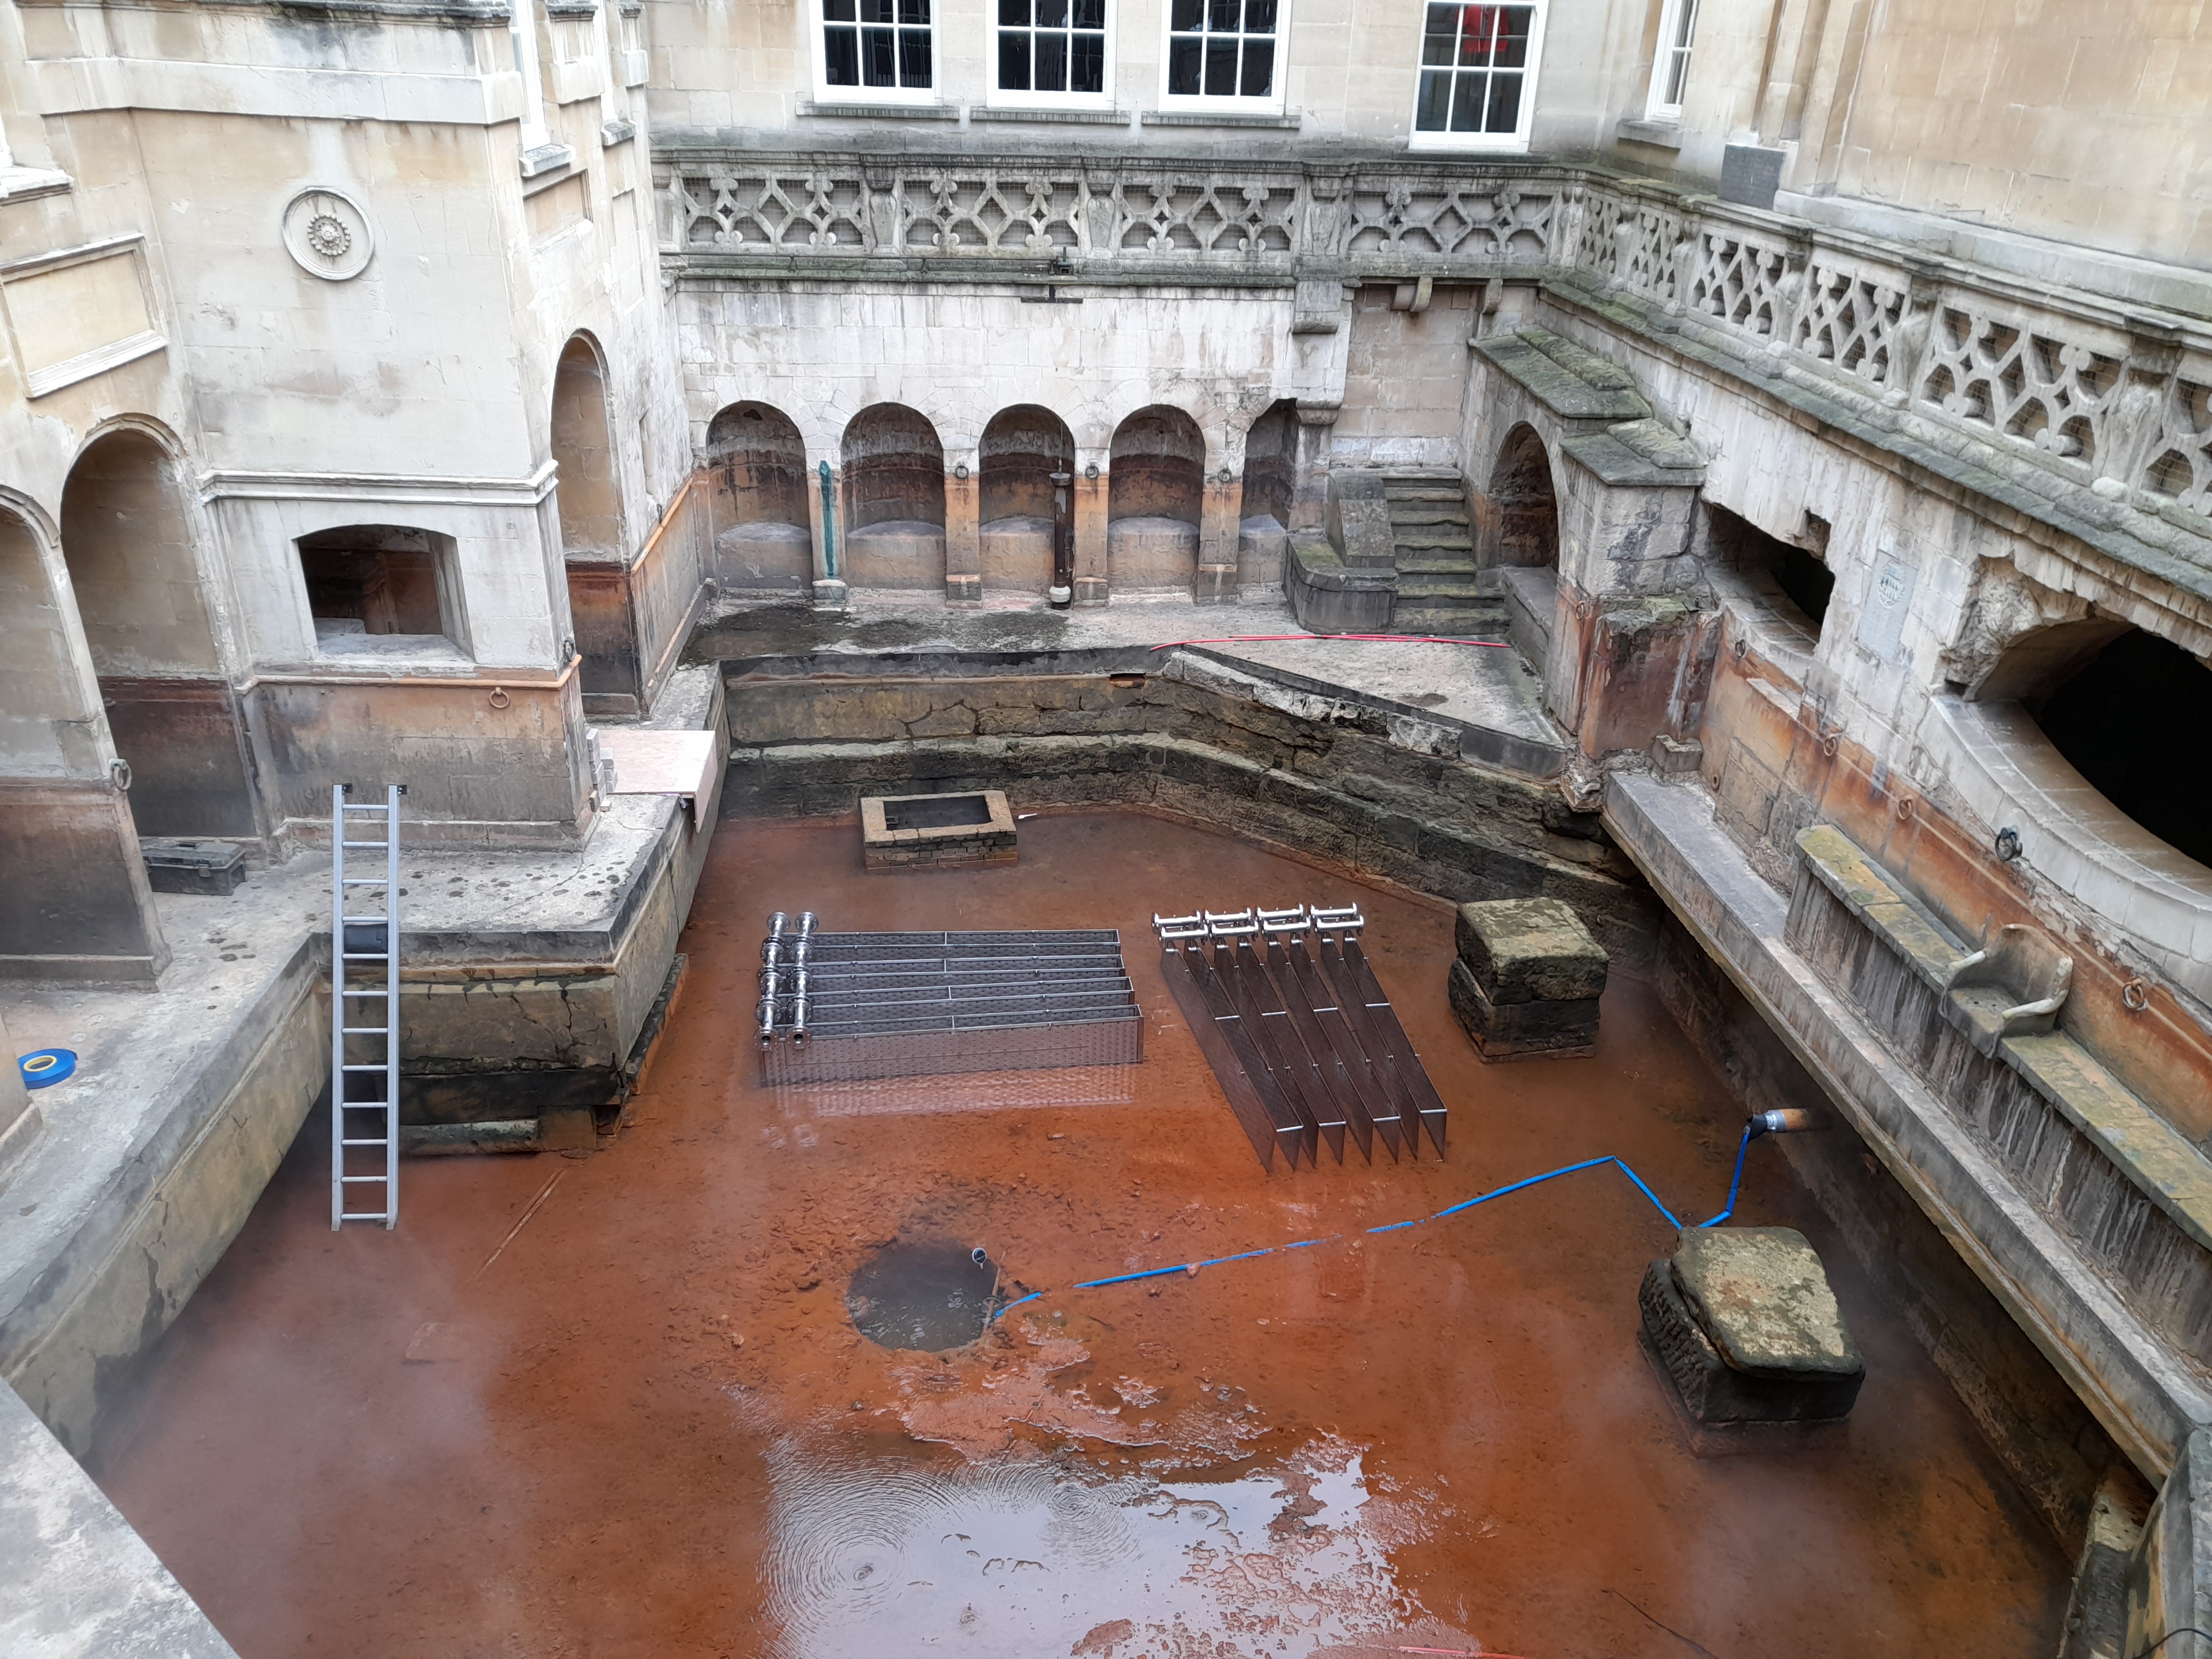 The Roman Baths and Pump Room to be heated by spa water